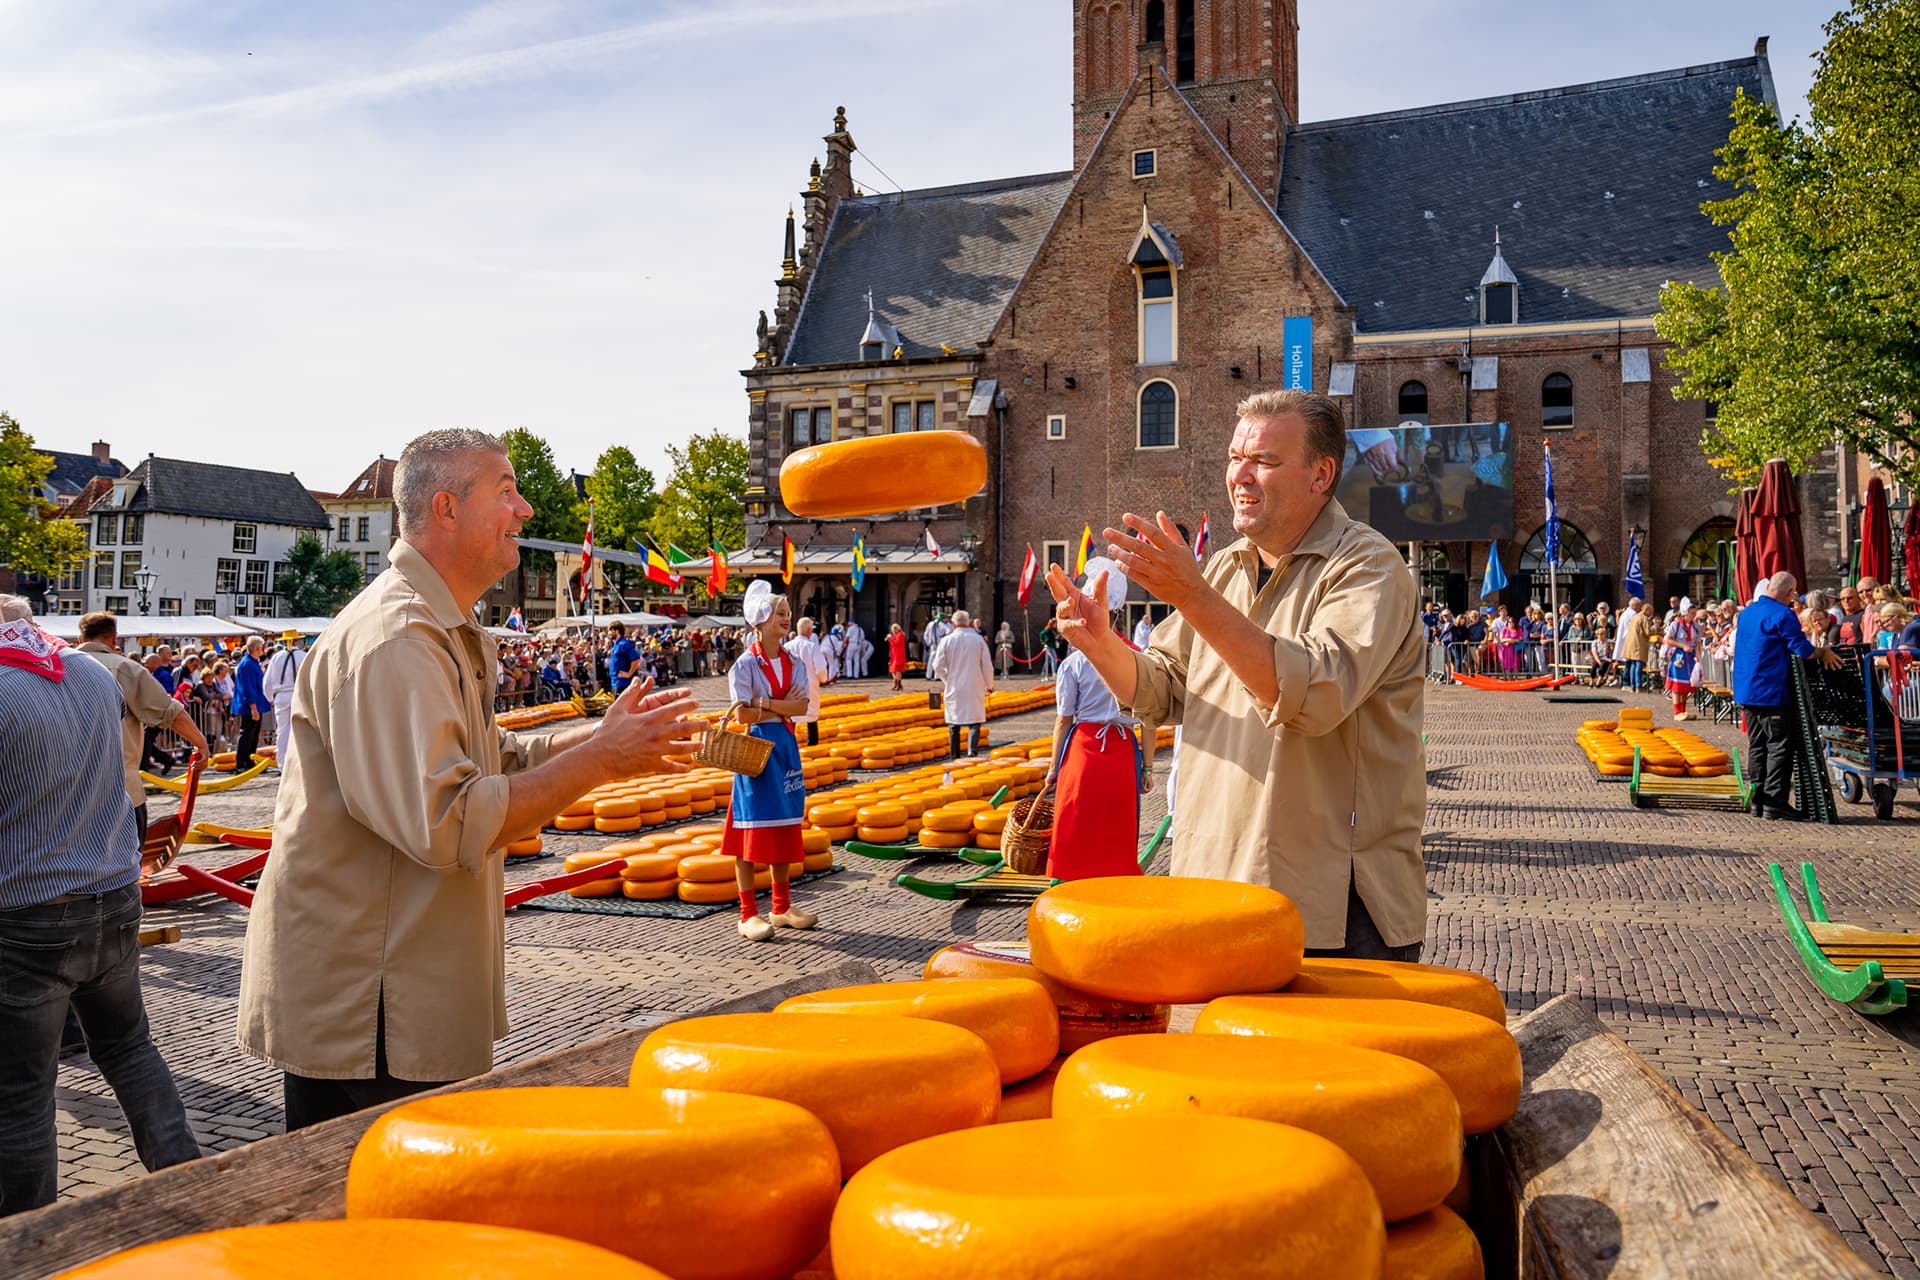 The course of a cheese market